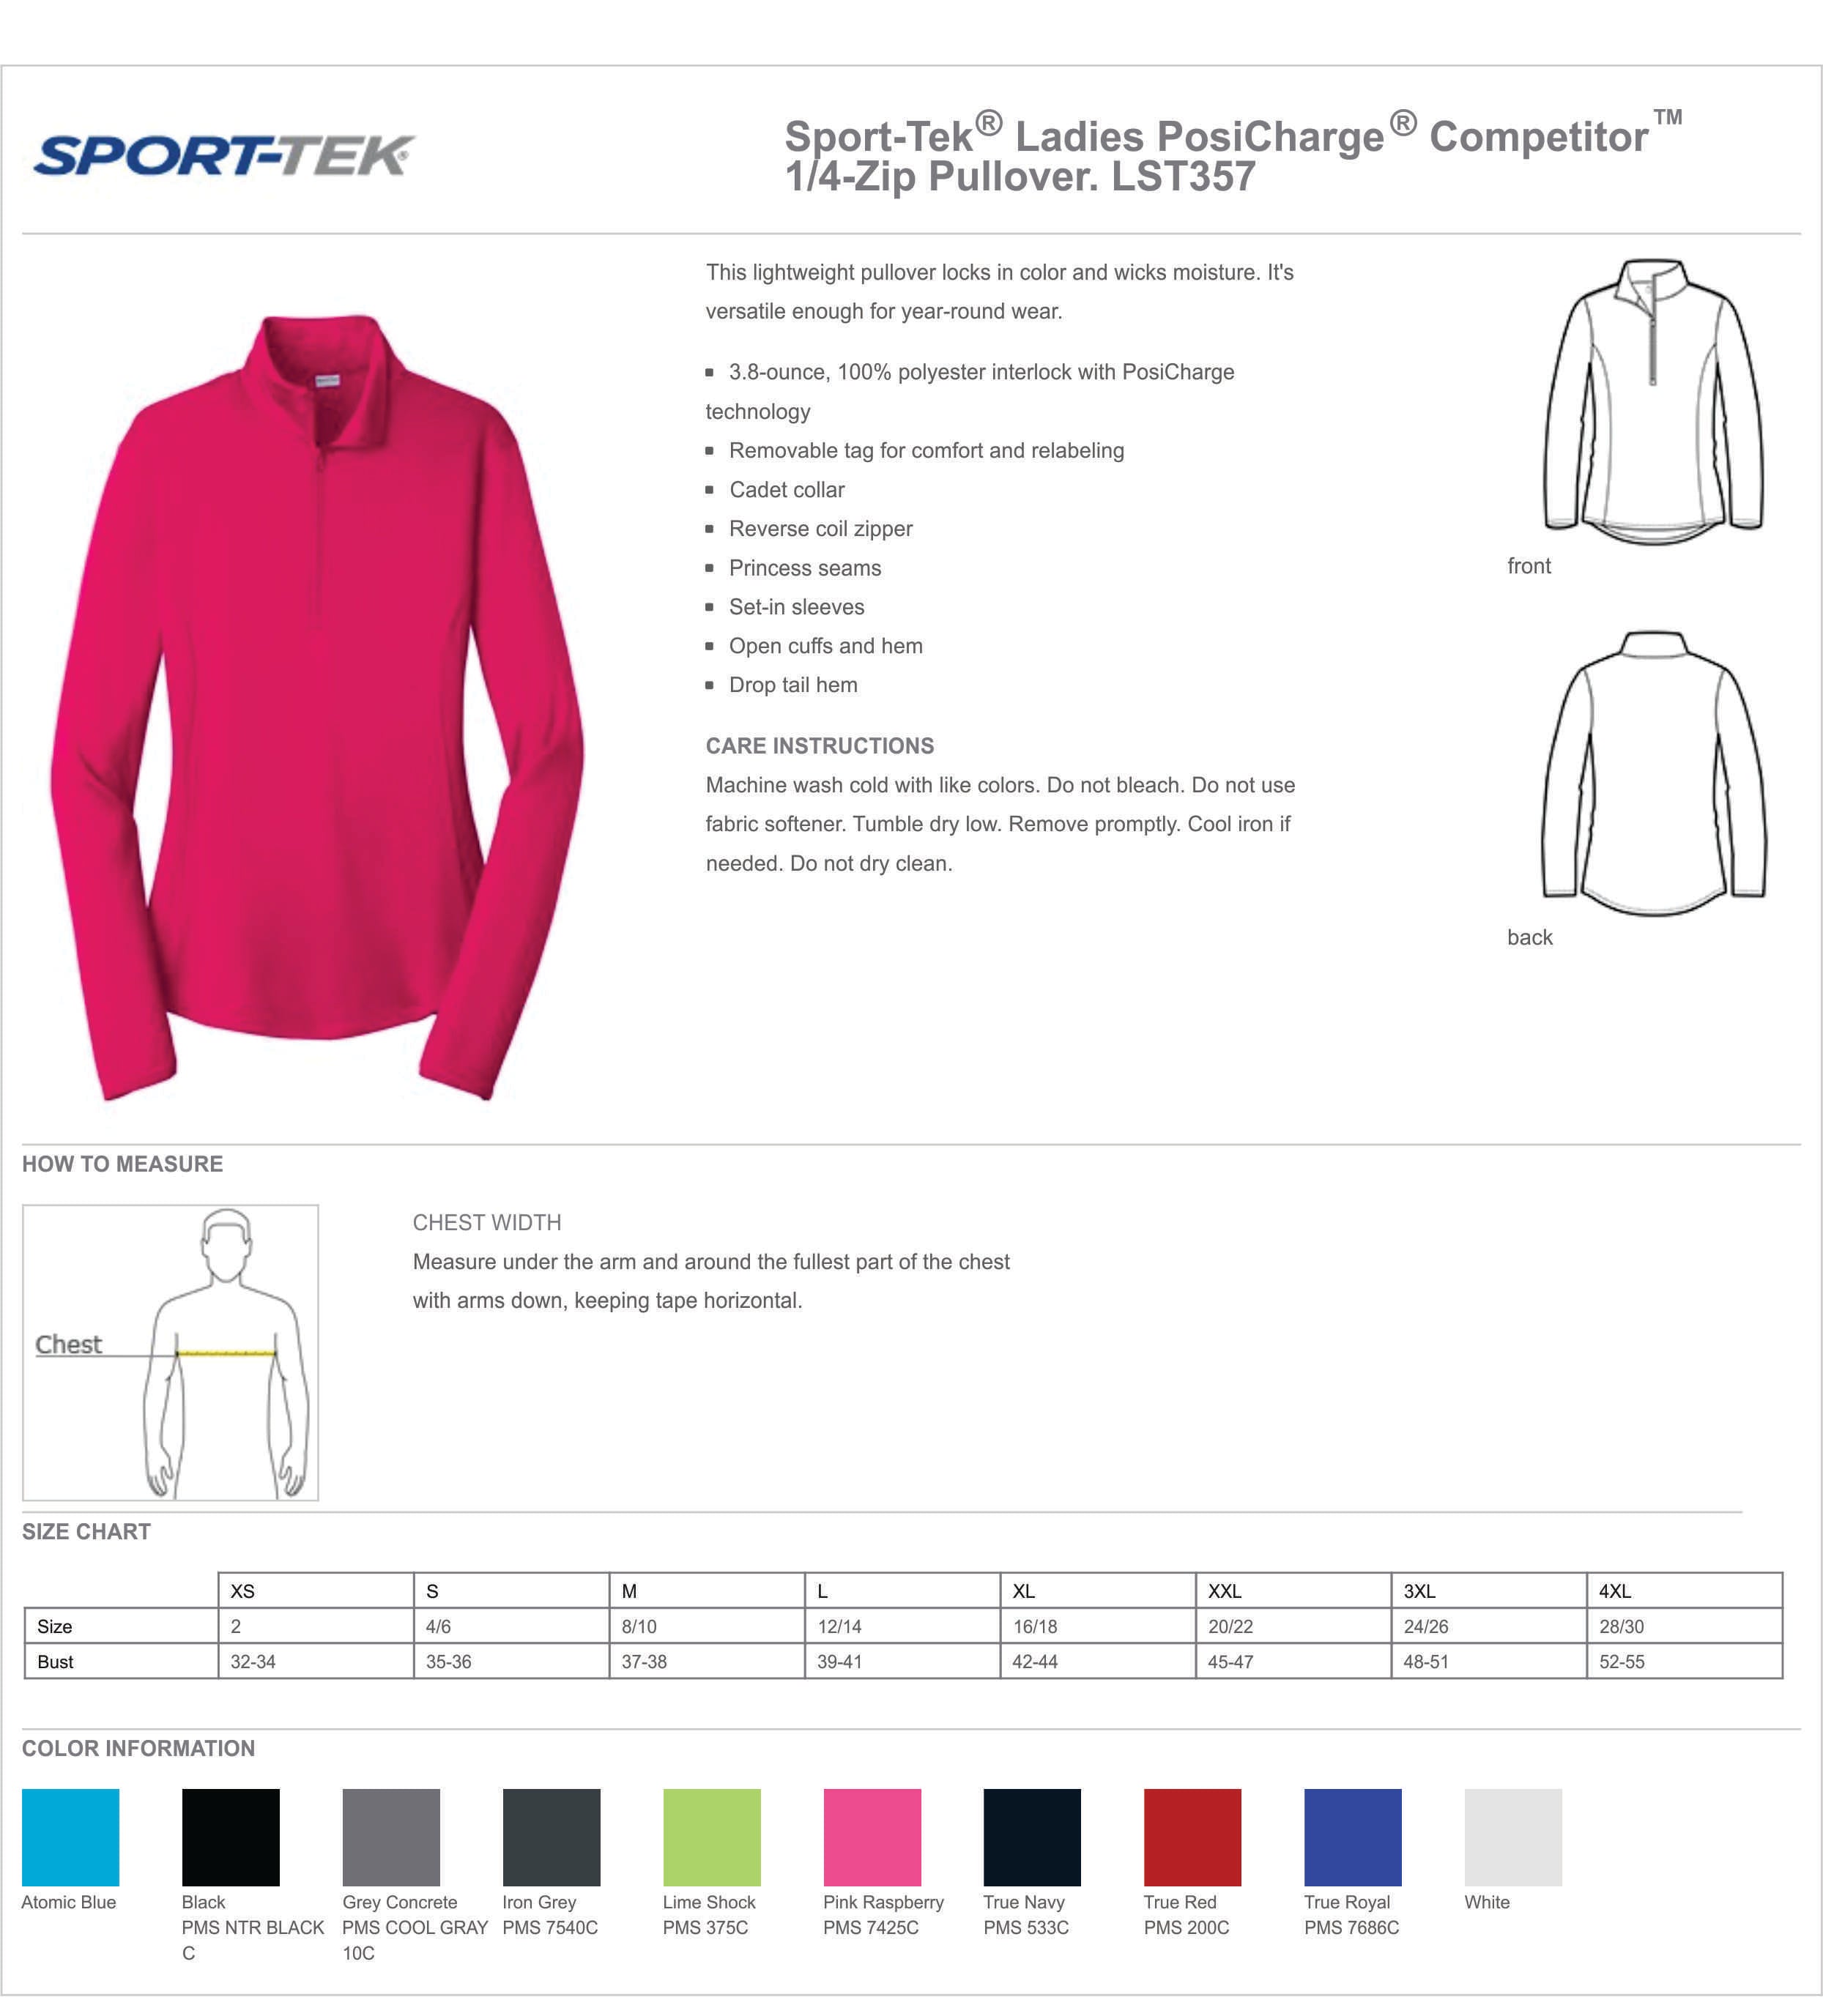 Sport-Tek Ladies PosiCharge Competitor™ 1/4-Zip Pullover, Product